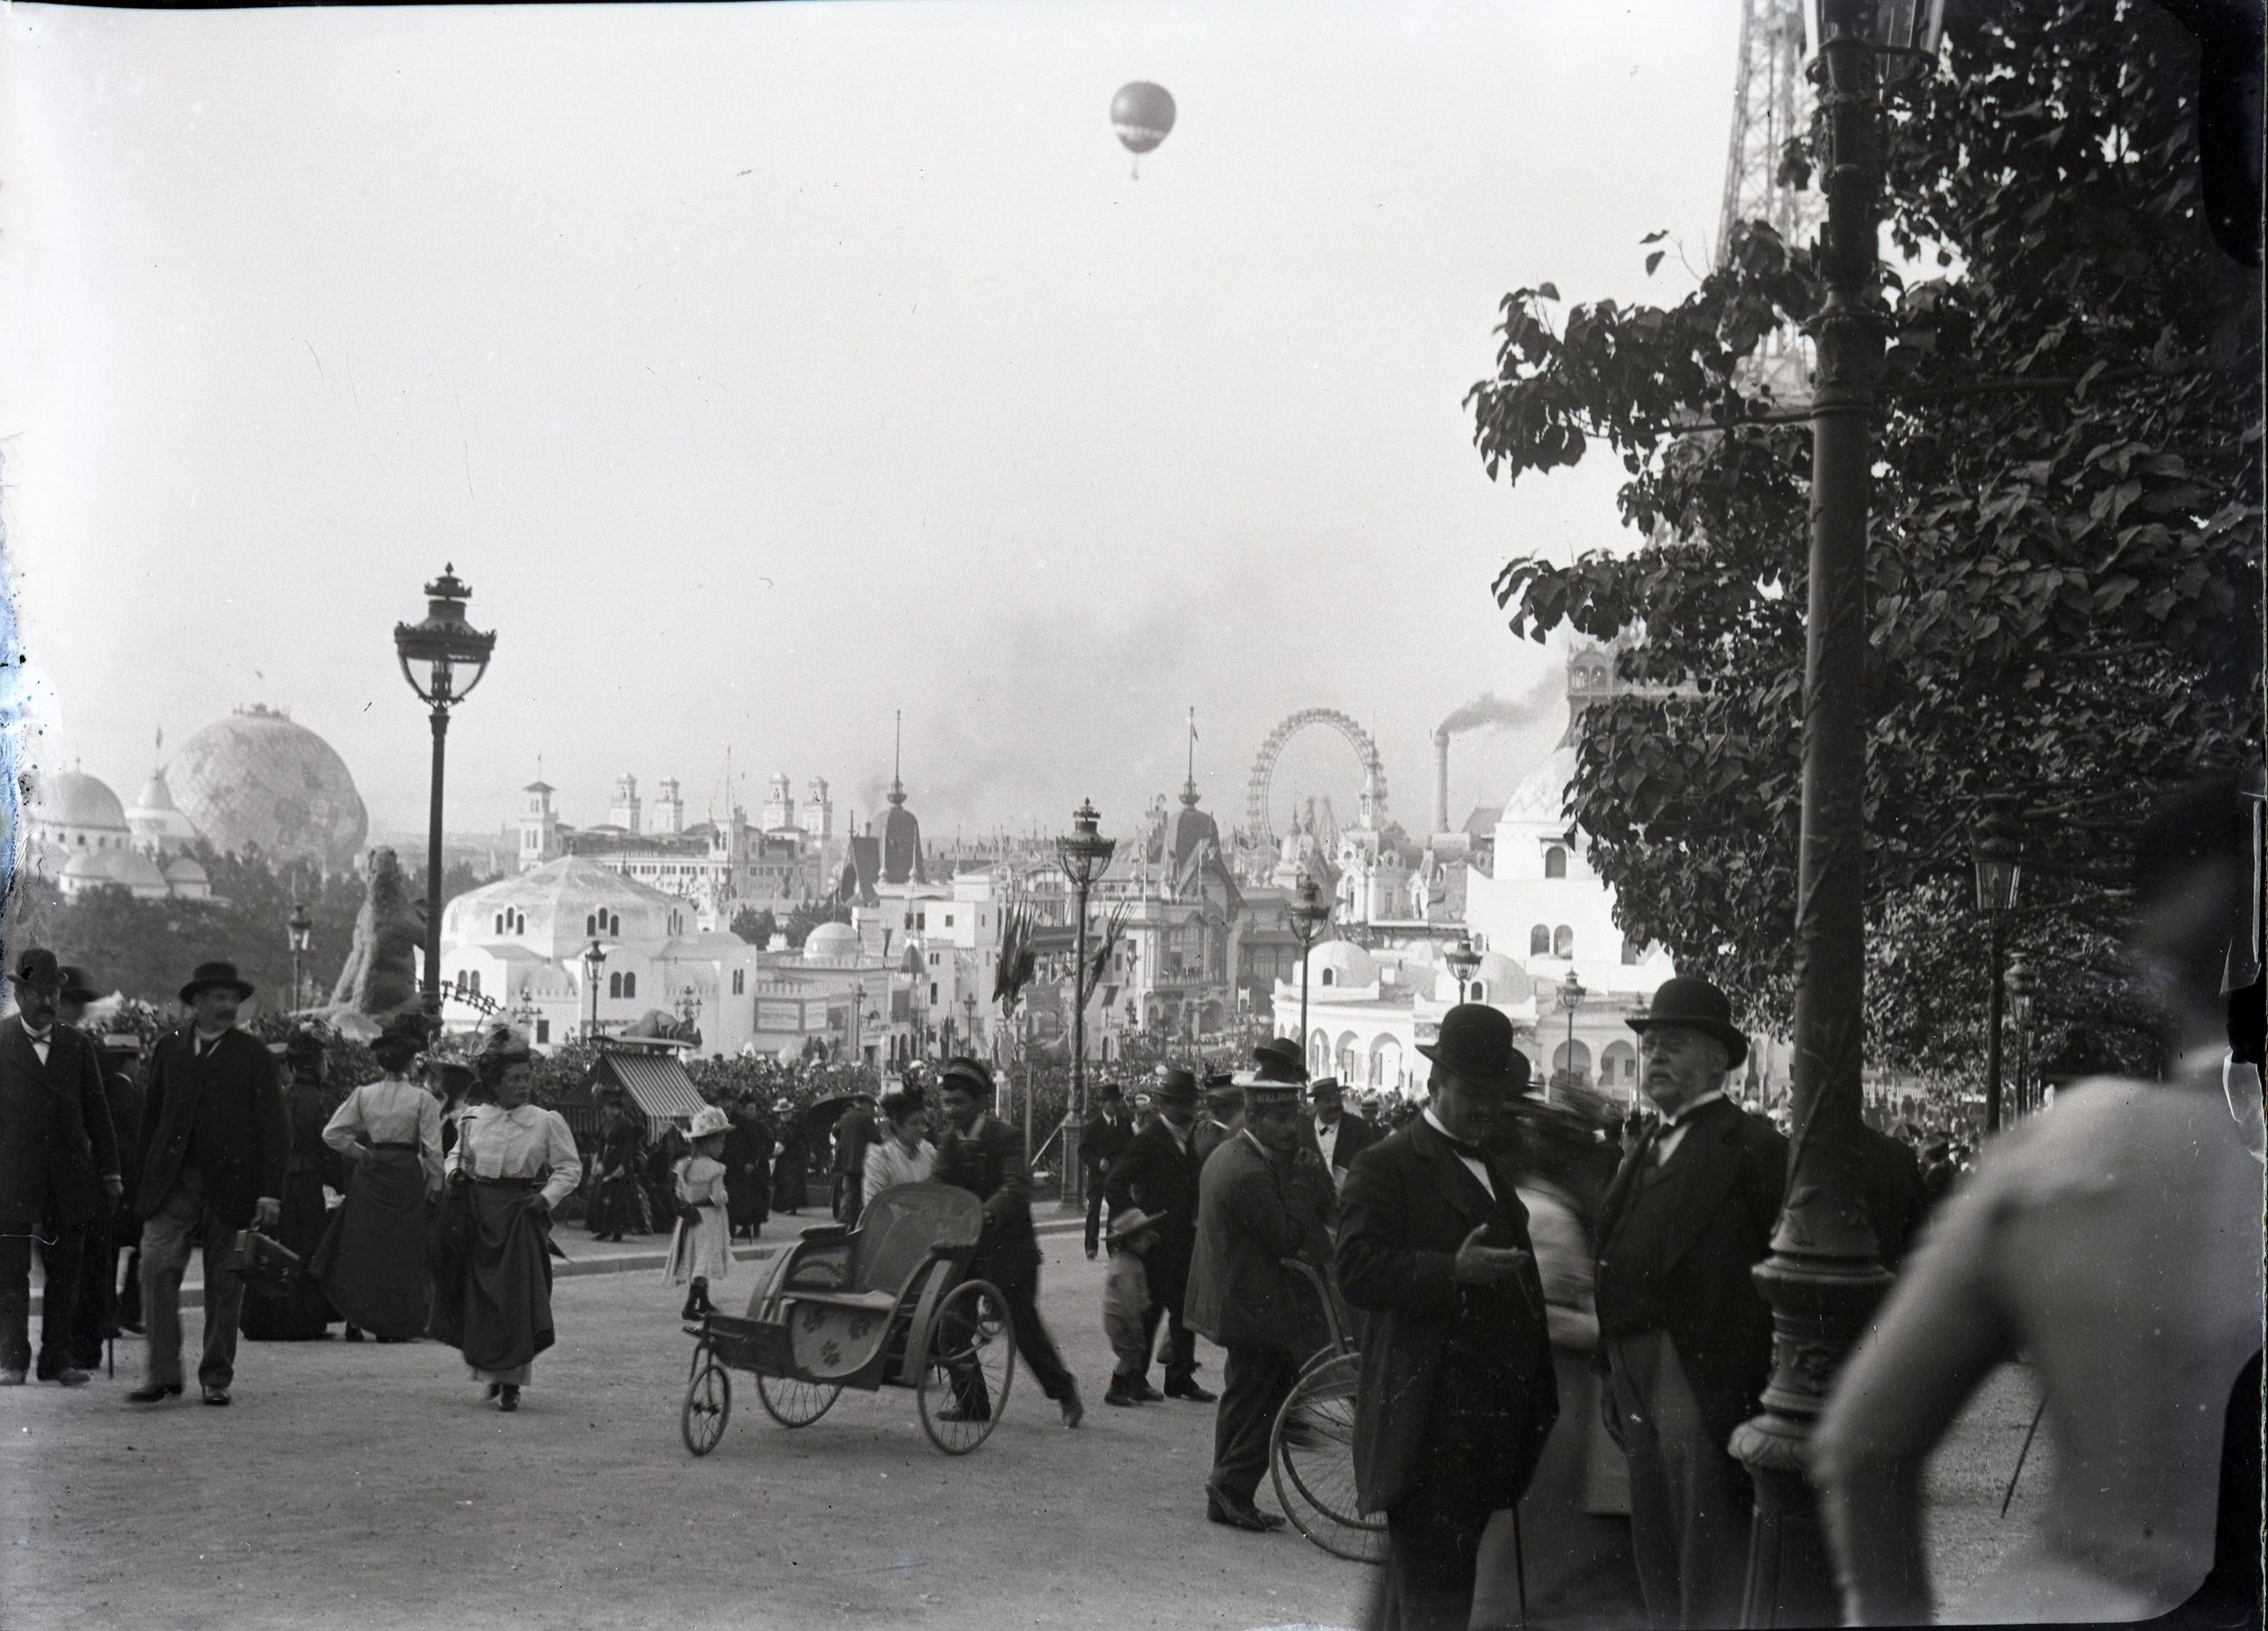  The Exposition Universelle of 1900 in Paris - very similar to a World’s Fair, but art nouveau themed.  